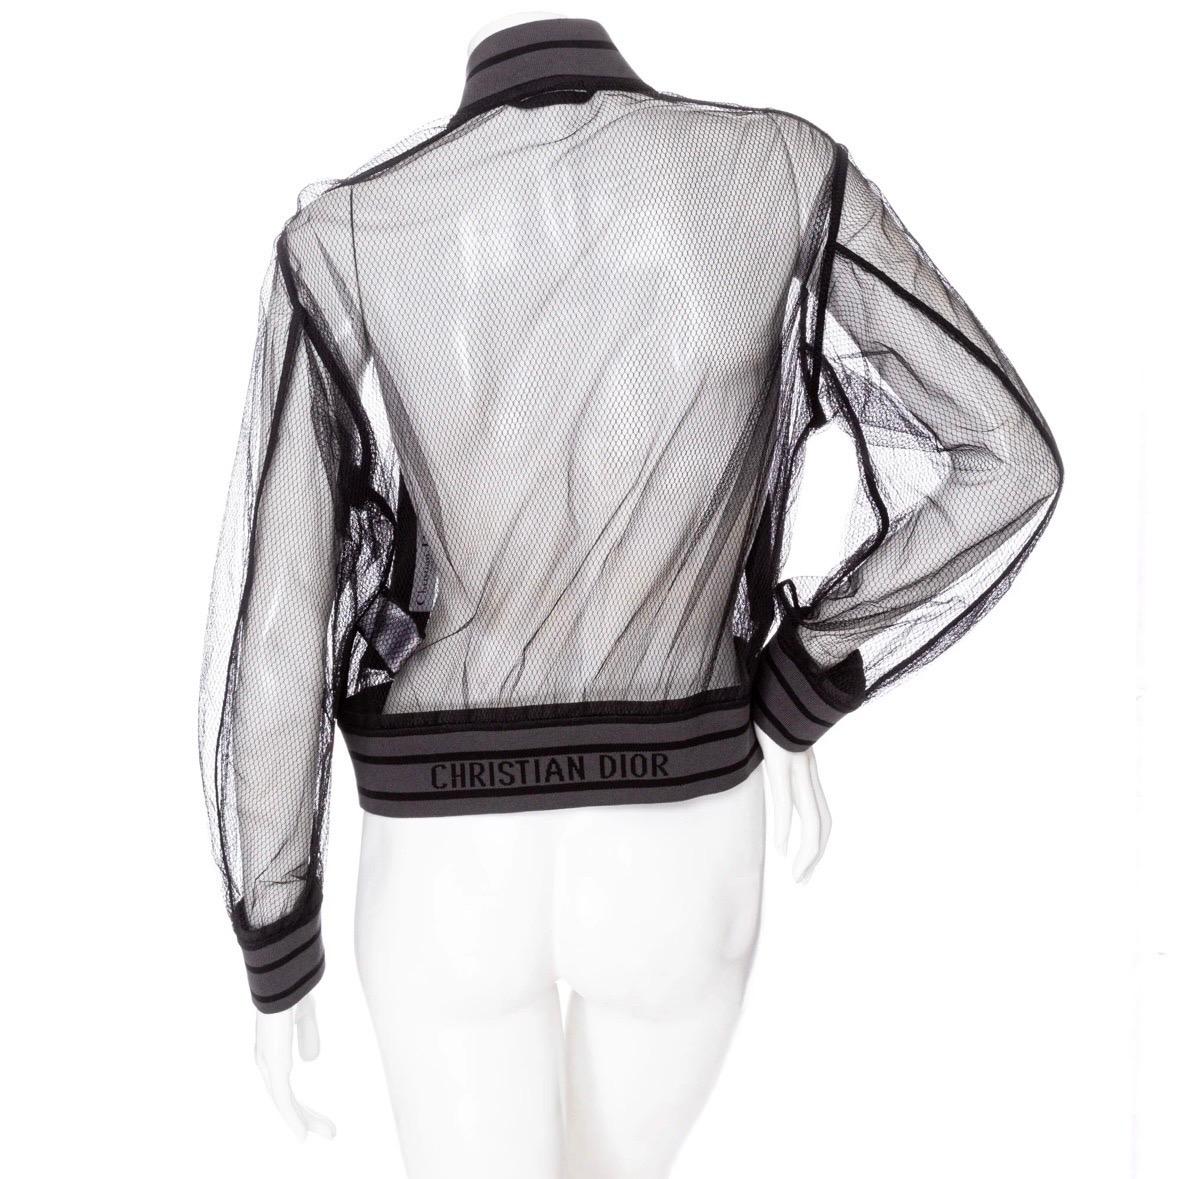 Christian Dior Mesh Jacket 

Black/Gray
Semi sheer
Double sided mesh
Ribbed knit contrast
Striping on cuffs, neck, and waist
Back logo detail
Front kangaroo pockets
Zip closure front
Made in Italy
100% polyamide; 100% polyamide other materials; 81%